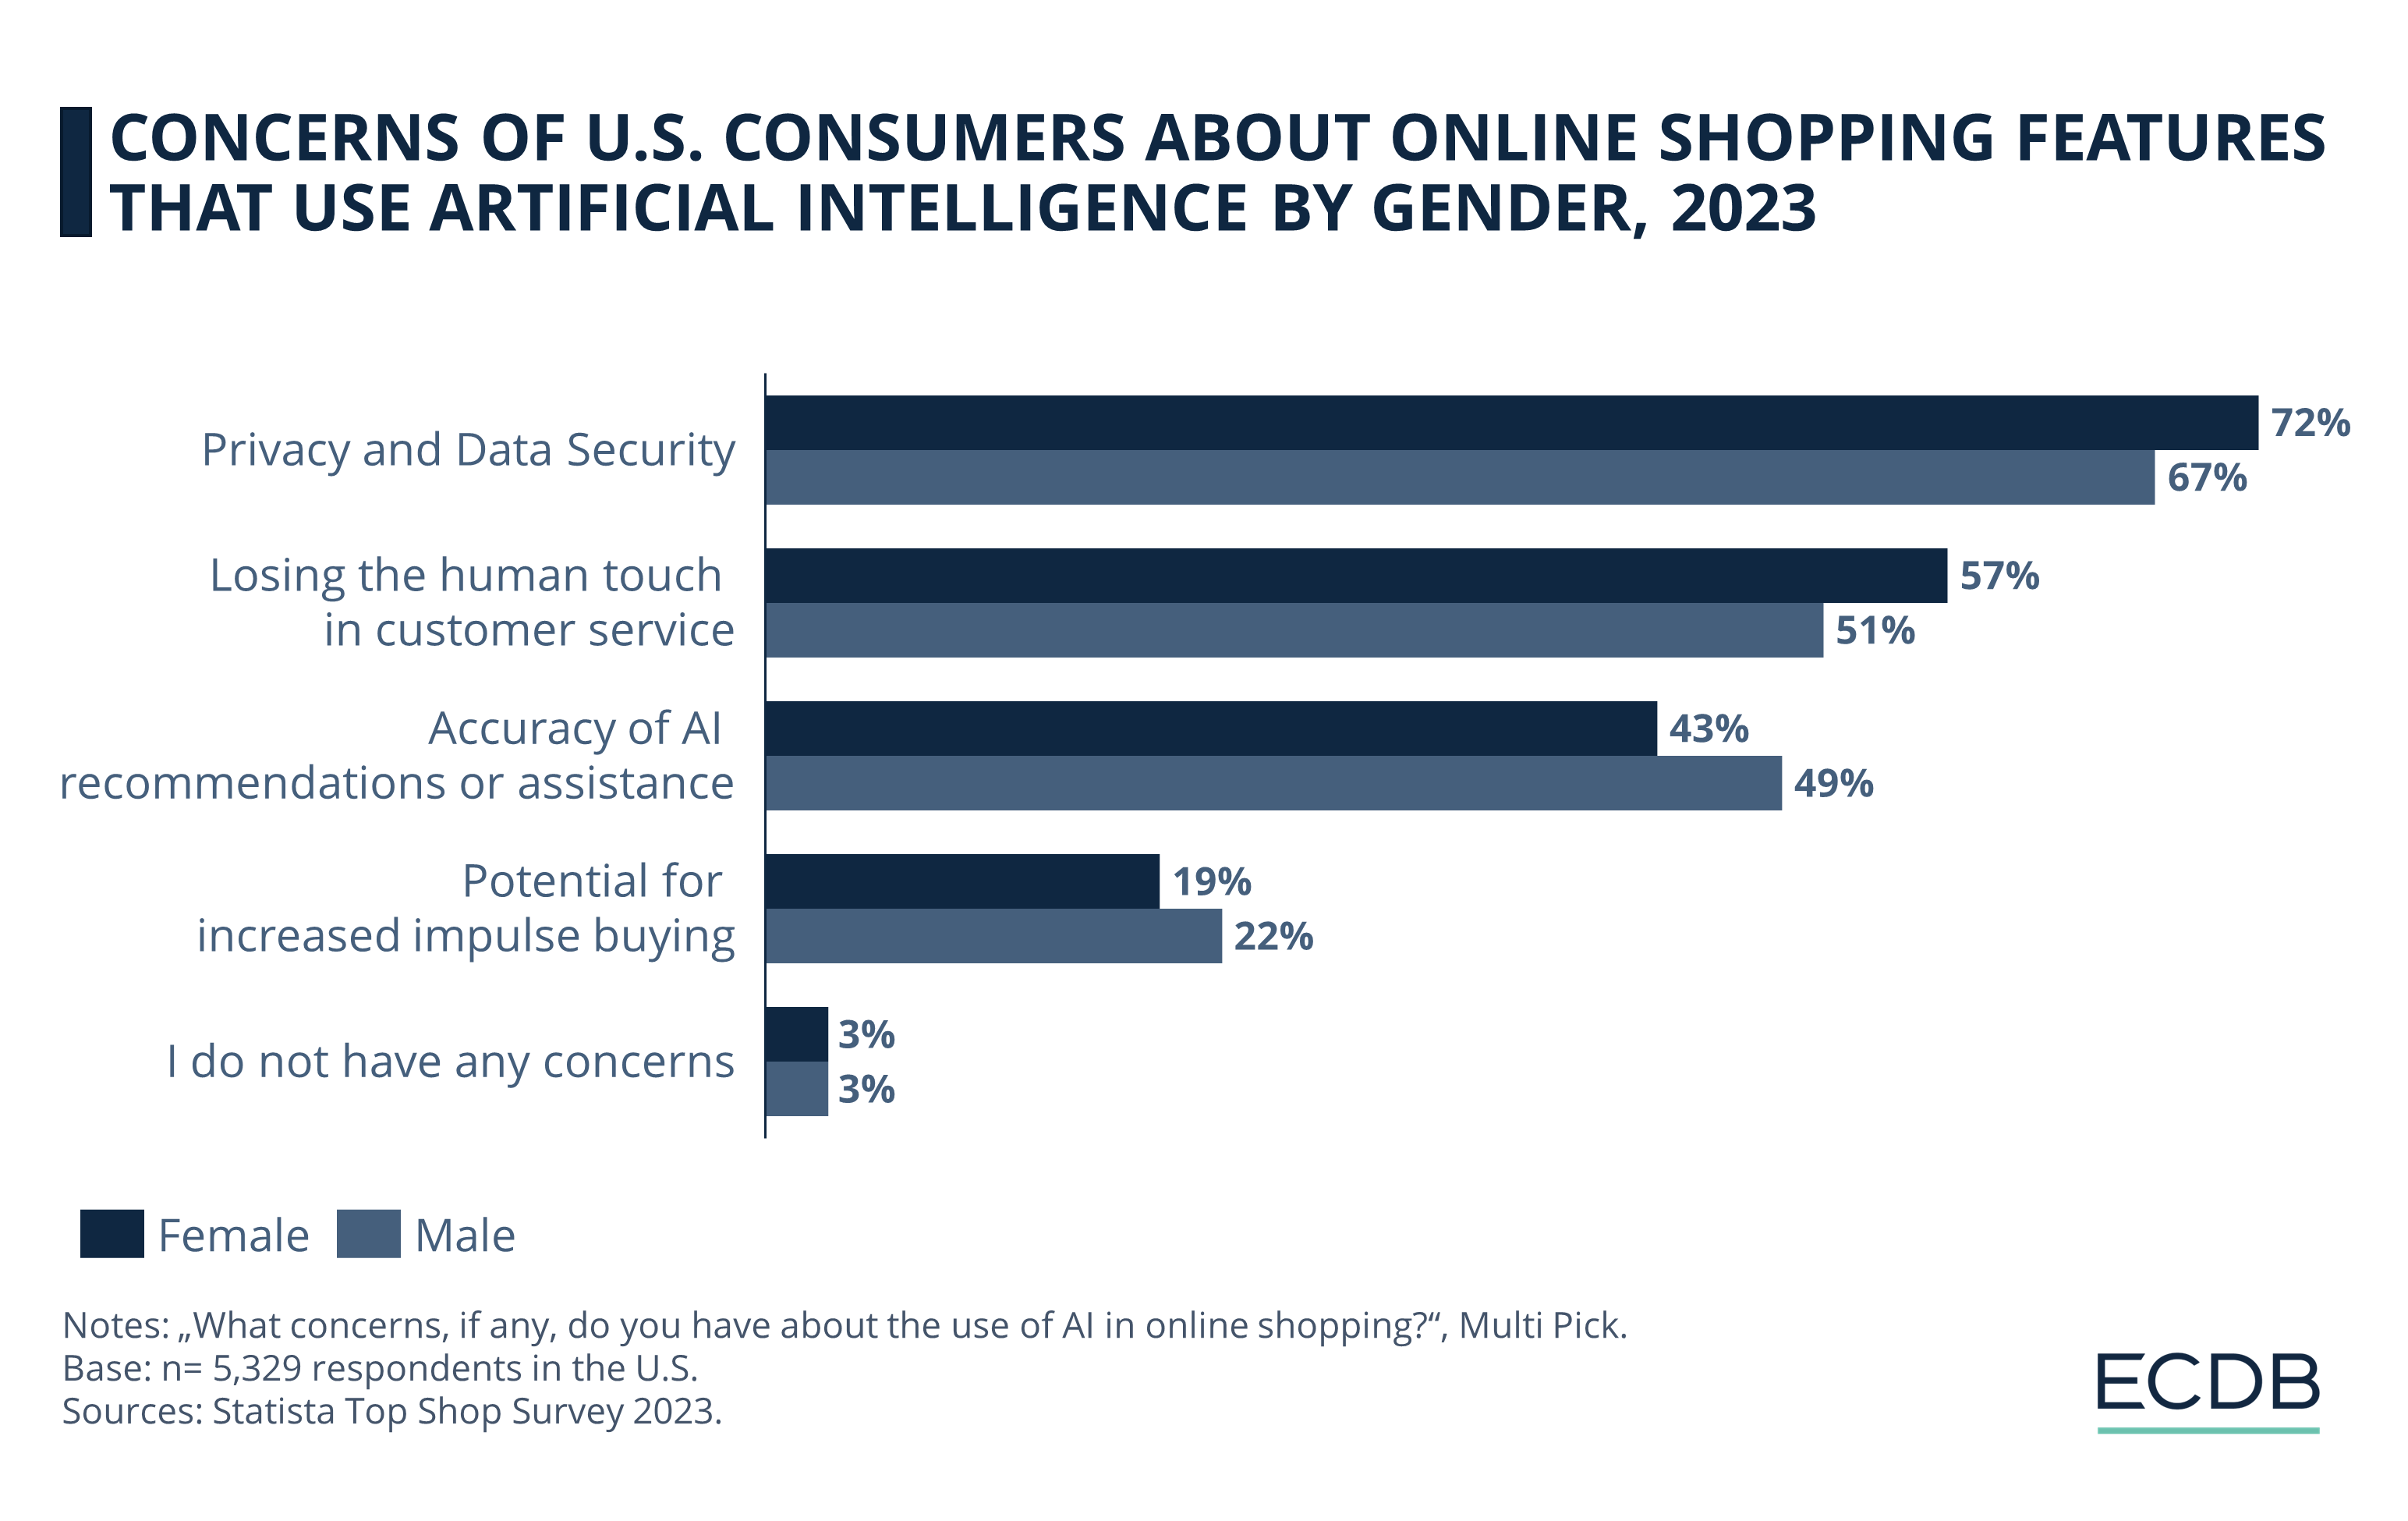 Concerns of U.S. Online Shoppers About Online Shopping Features That Use Artificial Intelligence by Gender, 2023